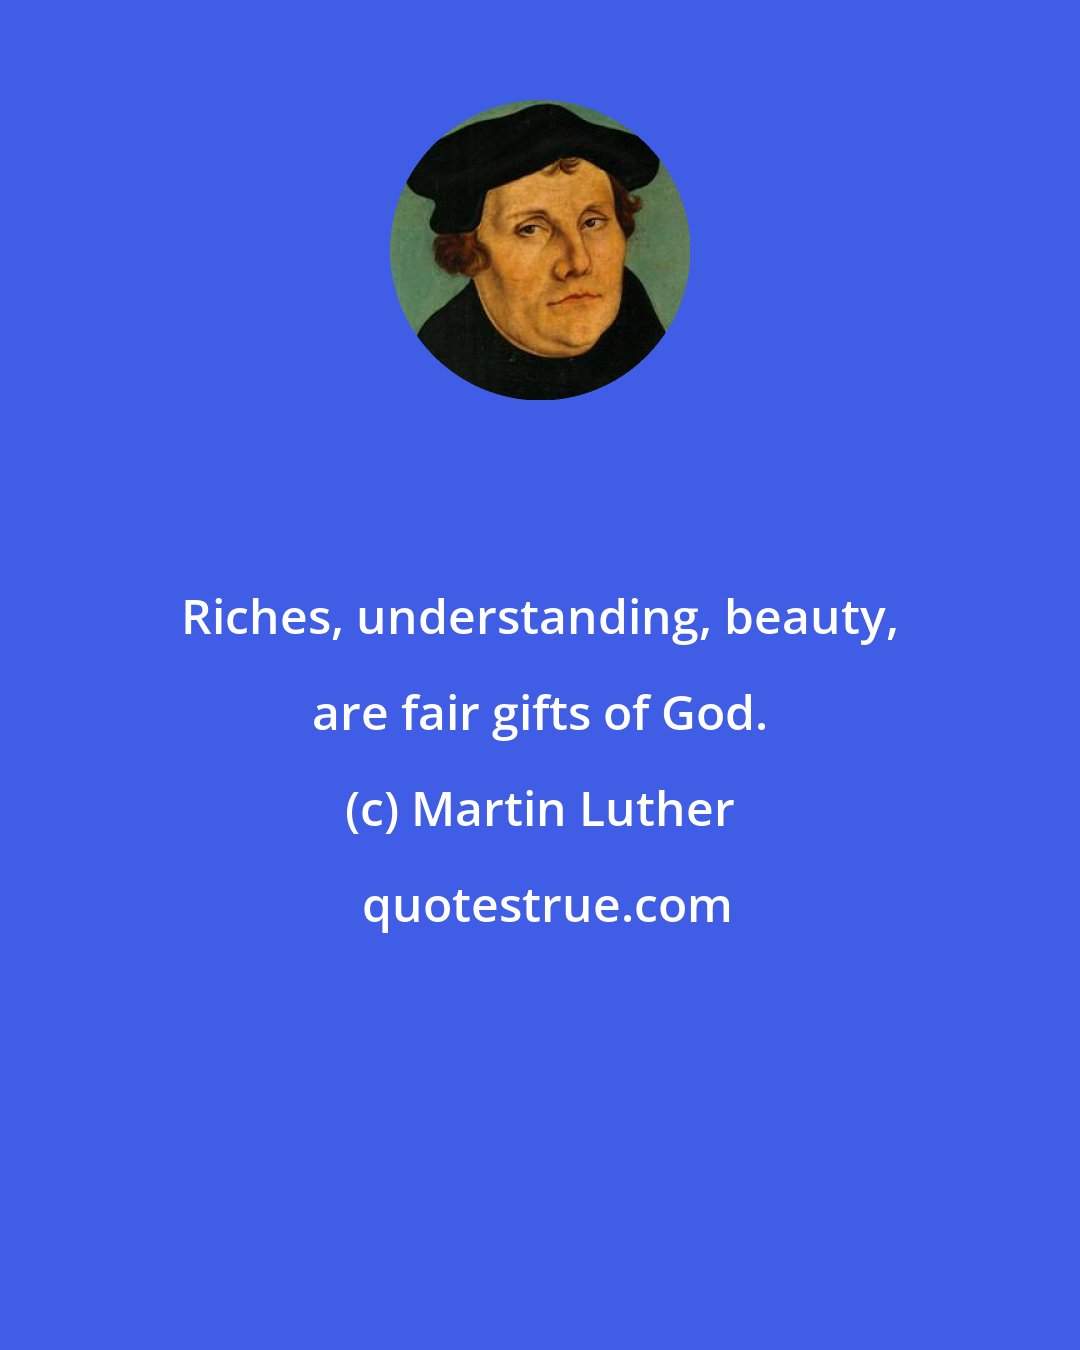 Martin Luther: Riches, understanding, beauty, are fair gifts of God.